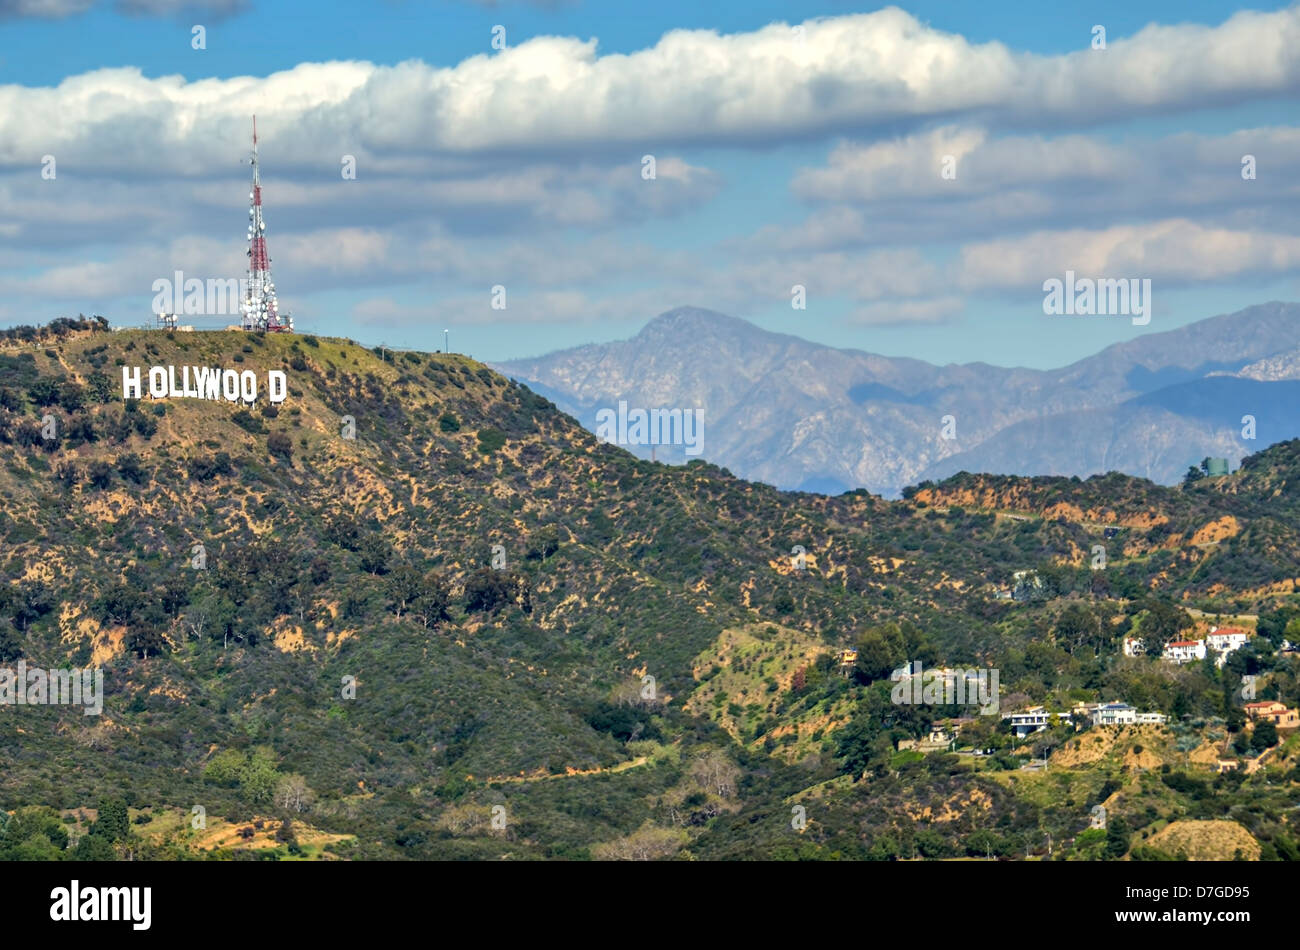 Hollywood Sign in the Hollywood Hills, West Hollywood, Los Angeles, California Stock Photo